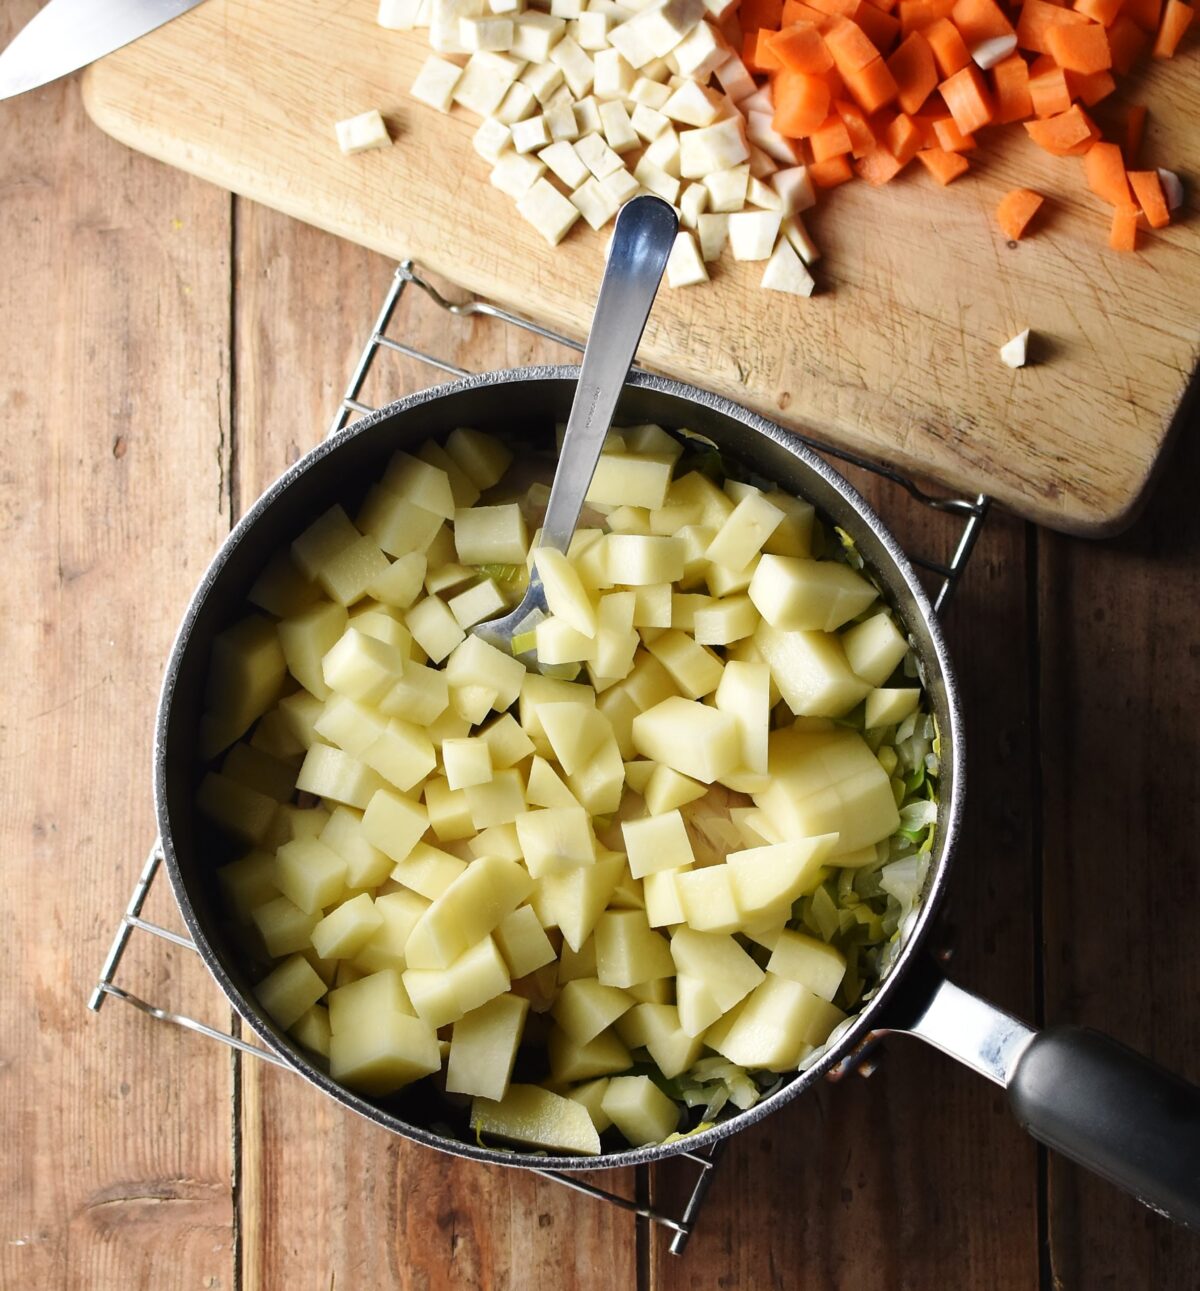 Cubed potatoes in large pot with spoon, and cubed vegetables in background.